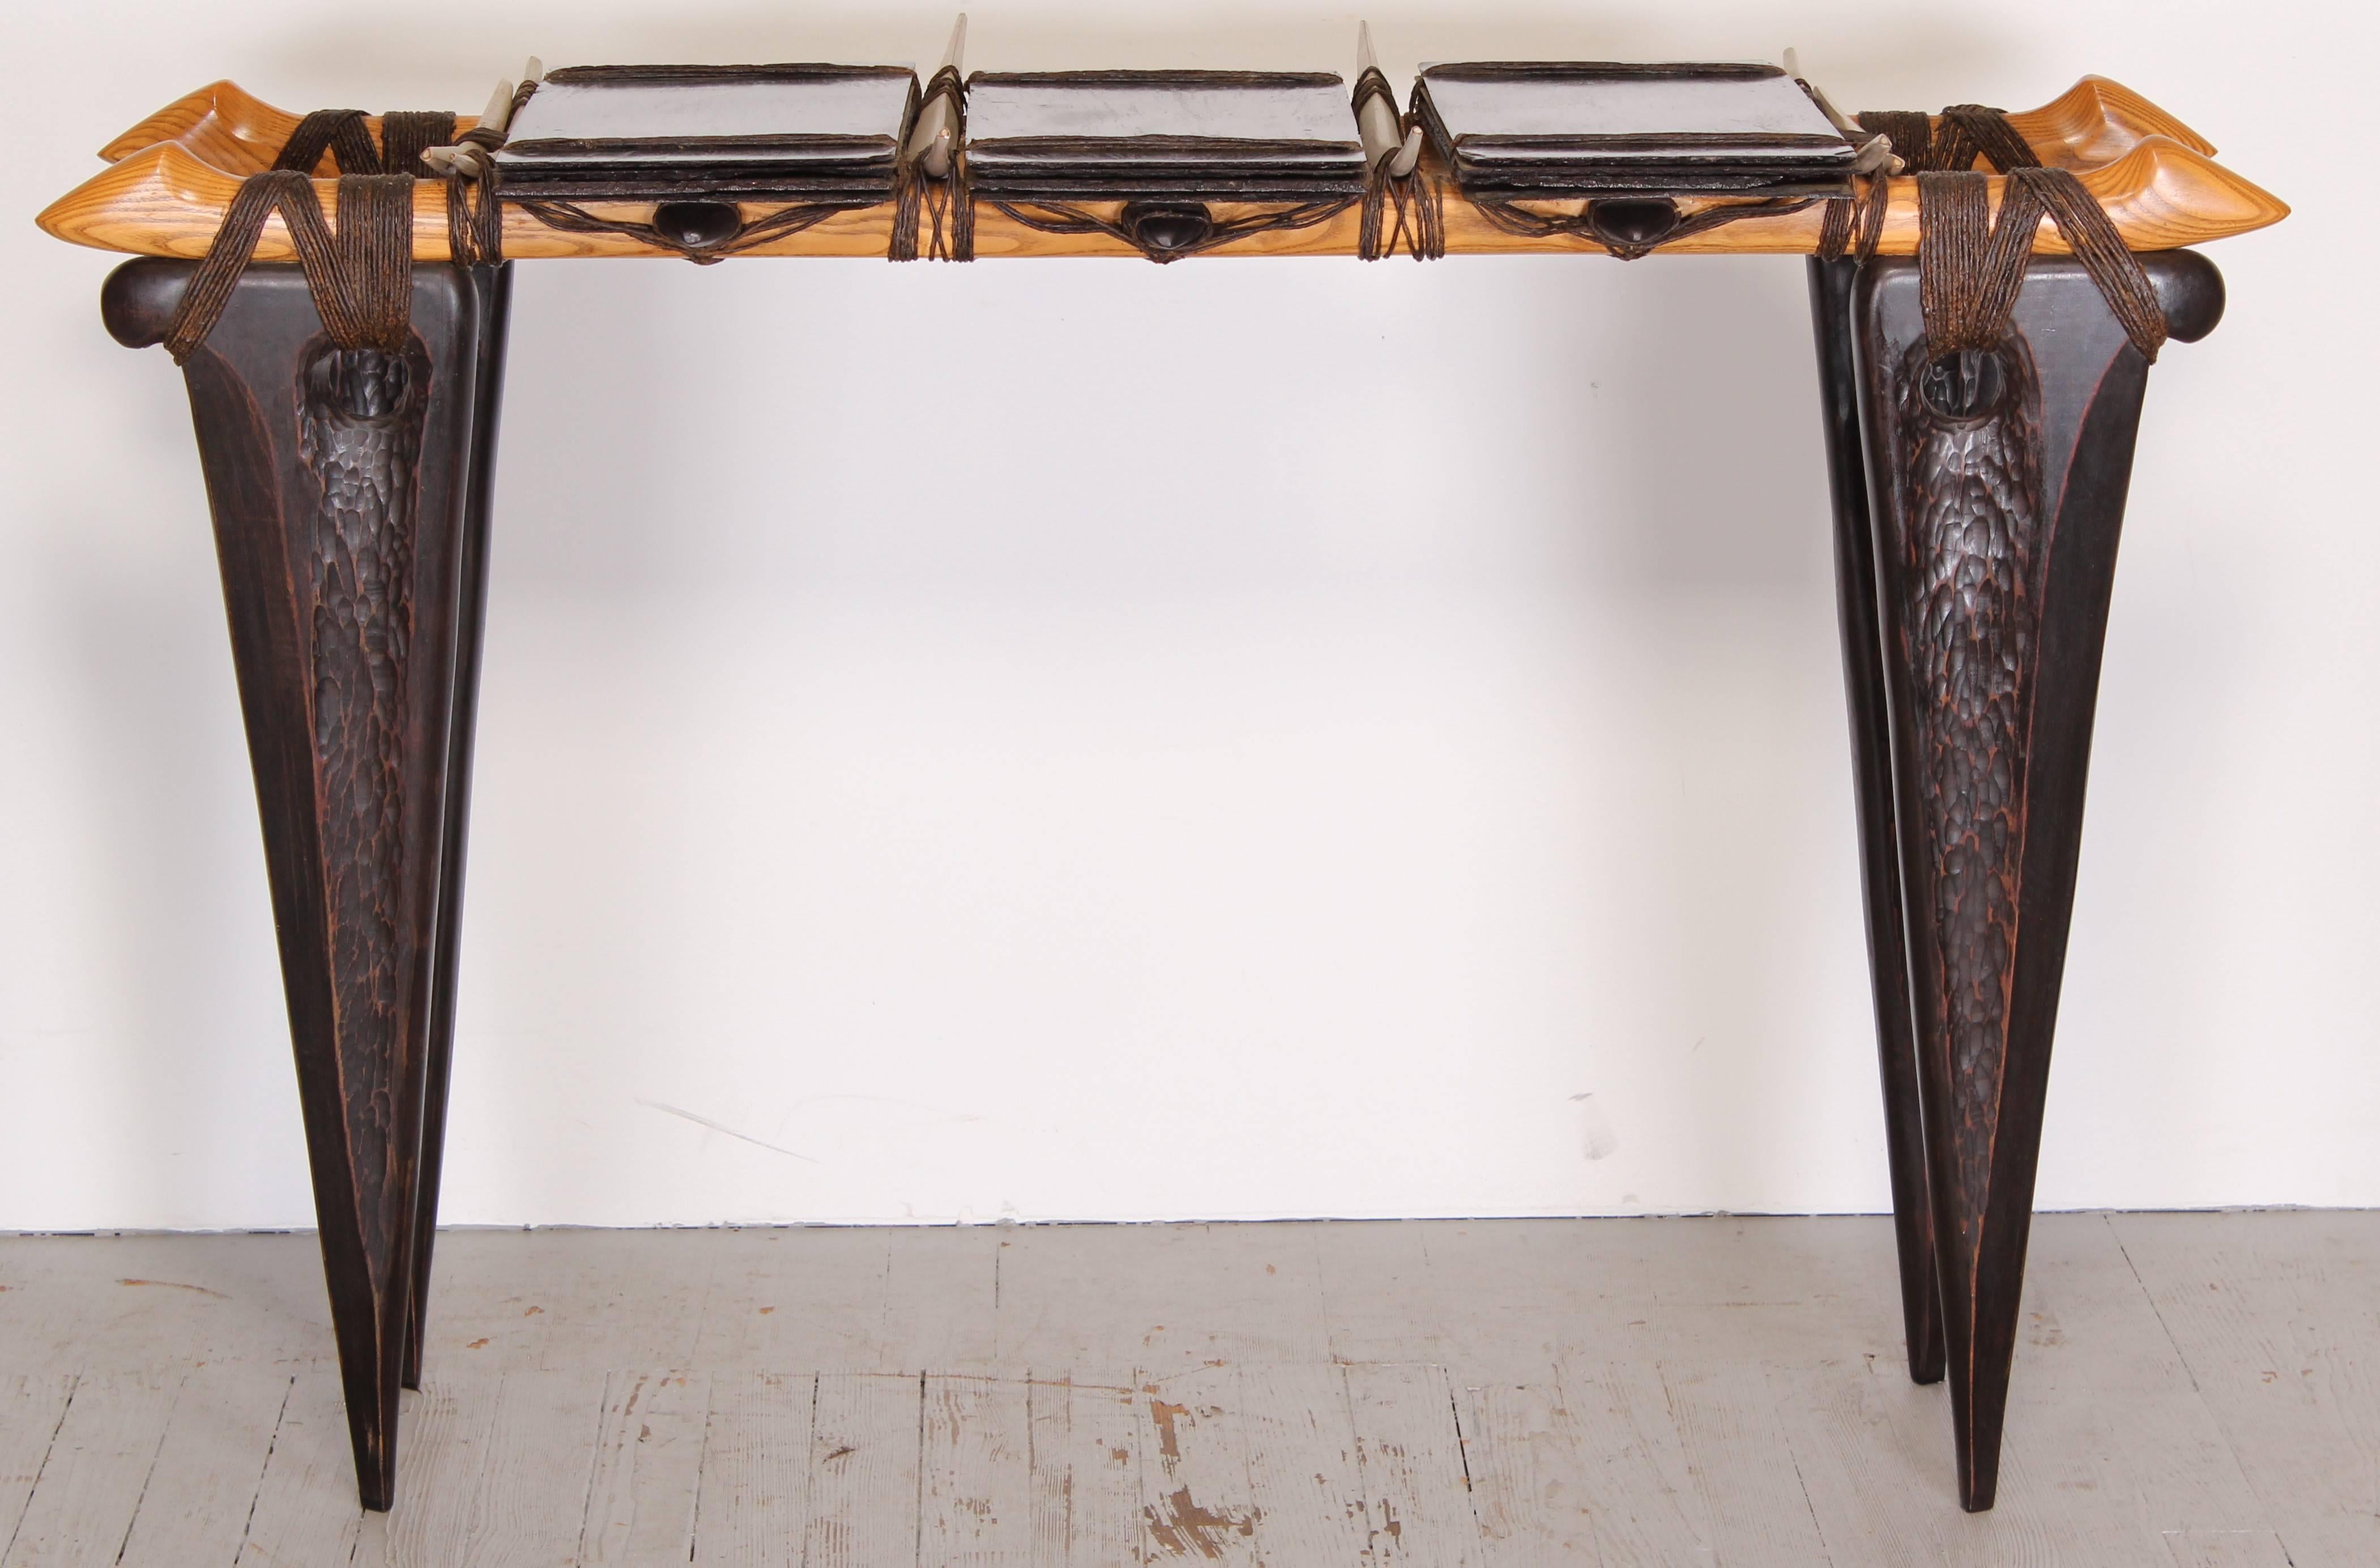 A hand-carved and chiseled bubinga and ebony wood console with wood roofing tiles, punctuated by oak spears, tied together with waxed jute. Keith Crowder's work was exhibited at the American Crafts Museum in New York in the 1980s.